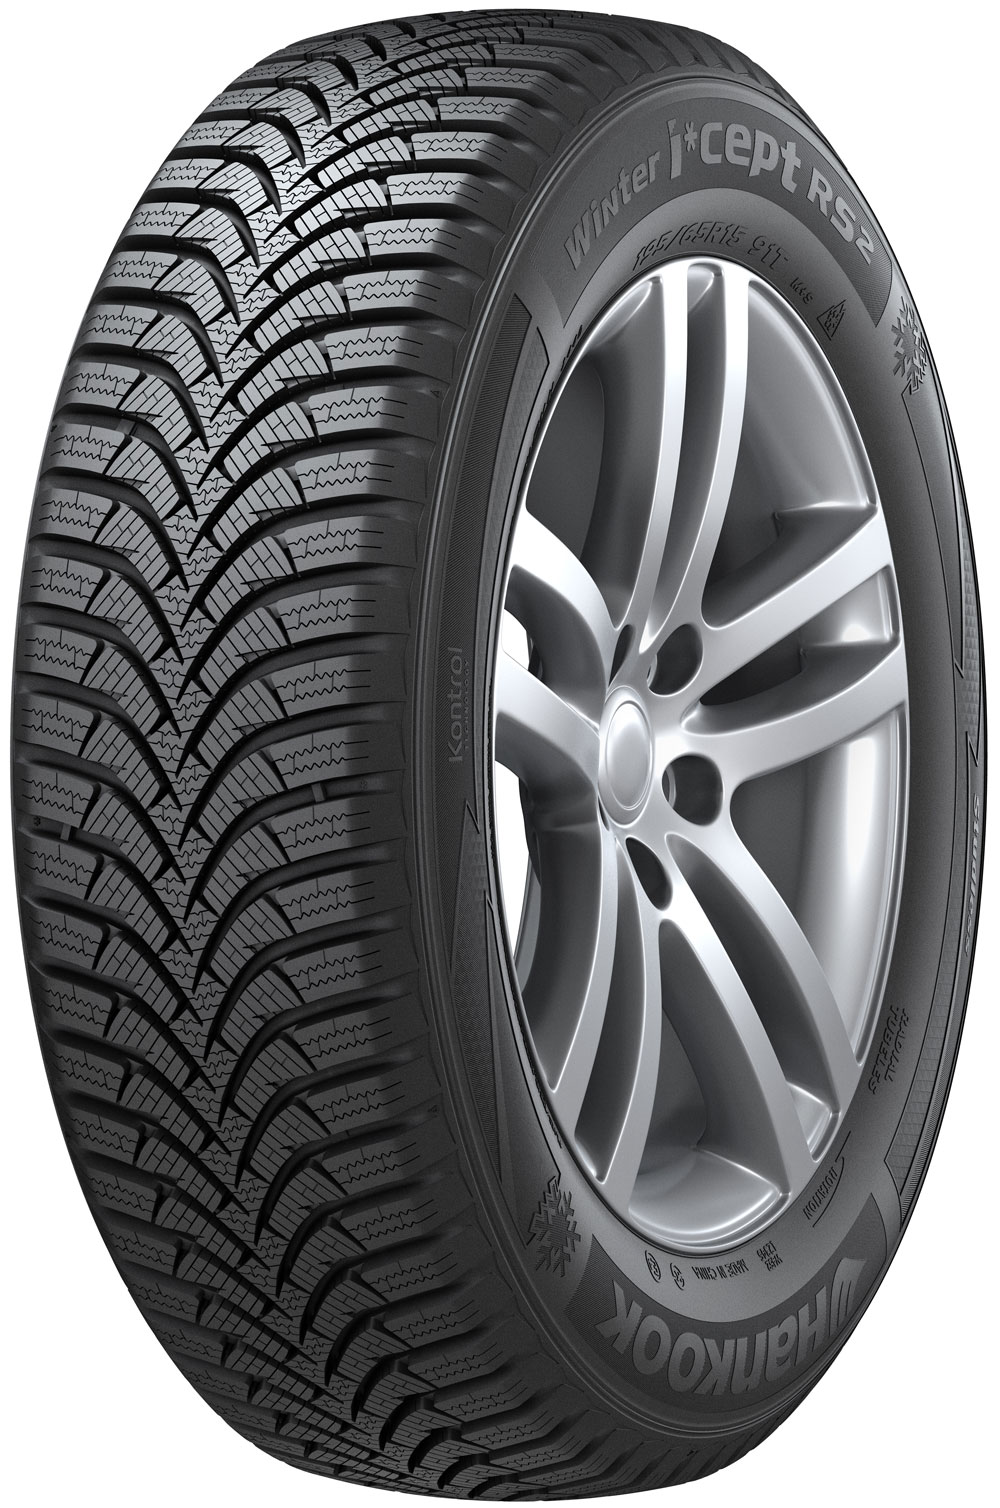 Anvelope auto HANKOOK Winter icept RS 2 (W452) BMW 135/80 R13 70T